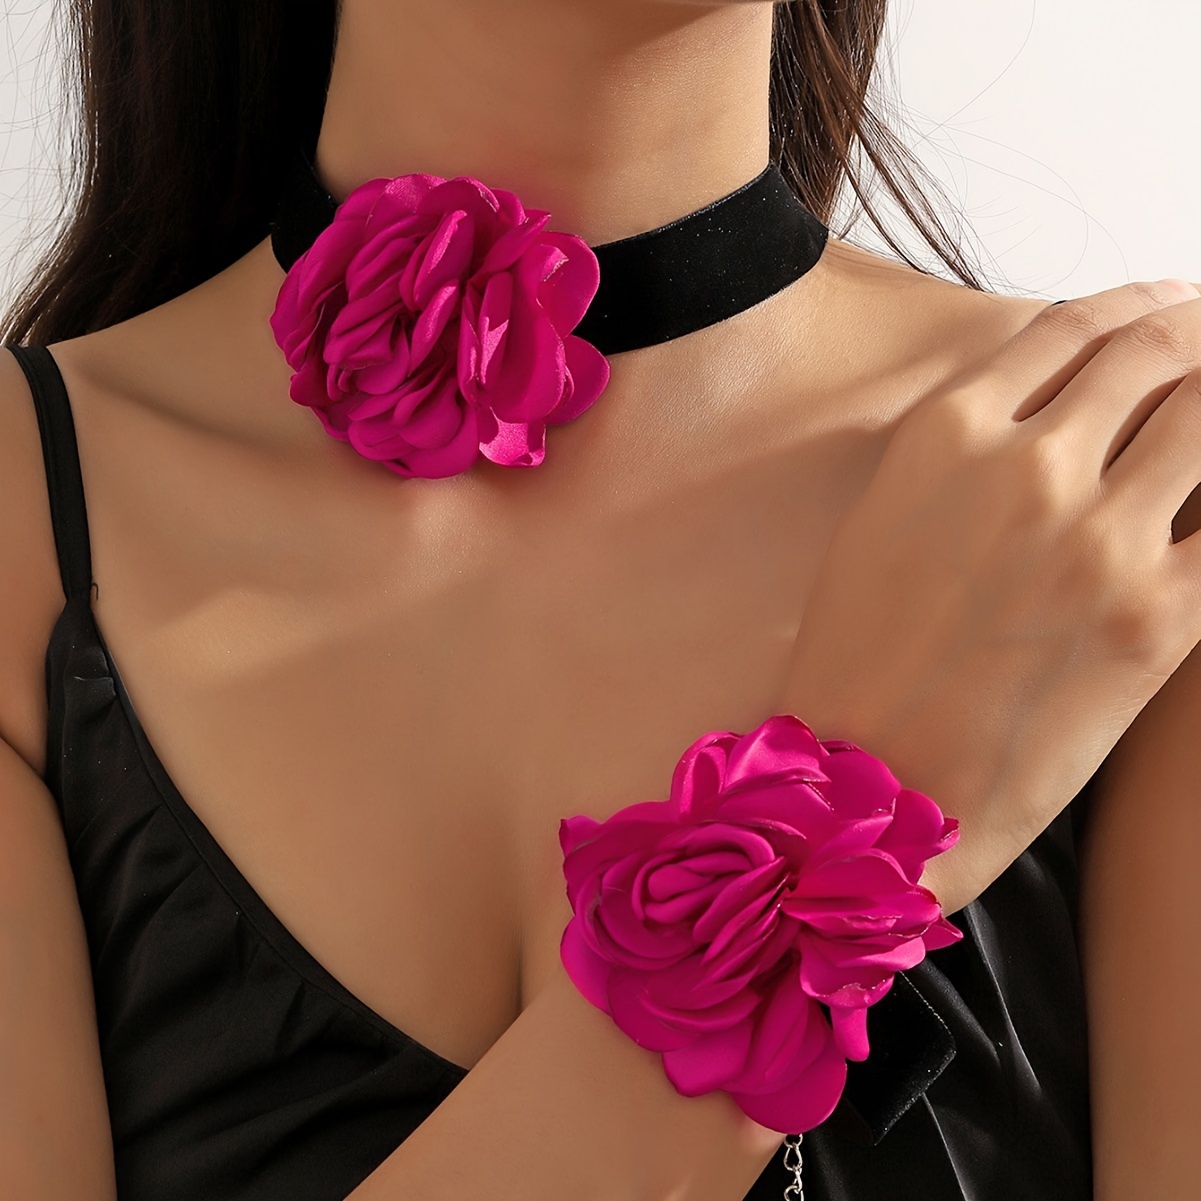 

1 Choker + 1 Bracelet Elegant Jewelry Set Trendy Pink Flower Design Symbol Of Romance And Mystery Match Daily Outfits Party Accessories